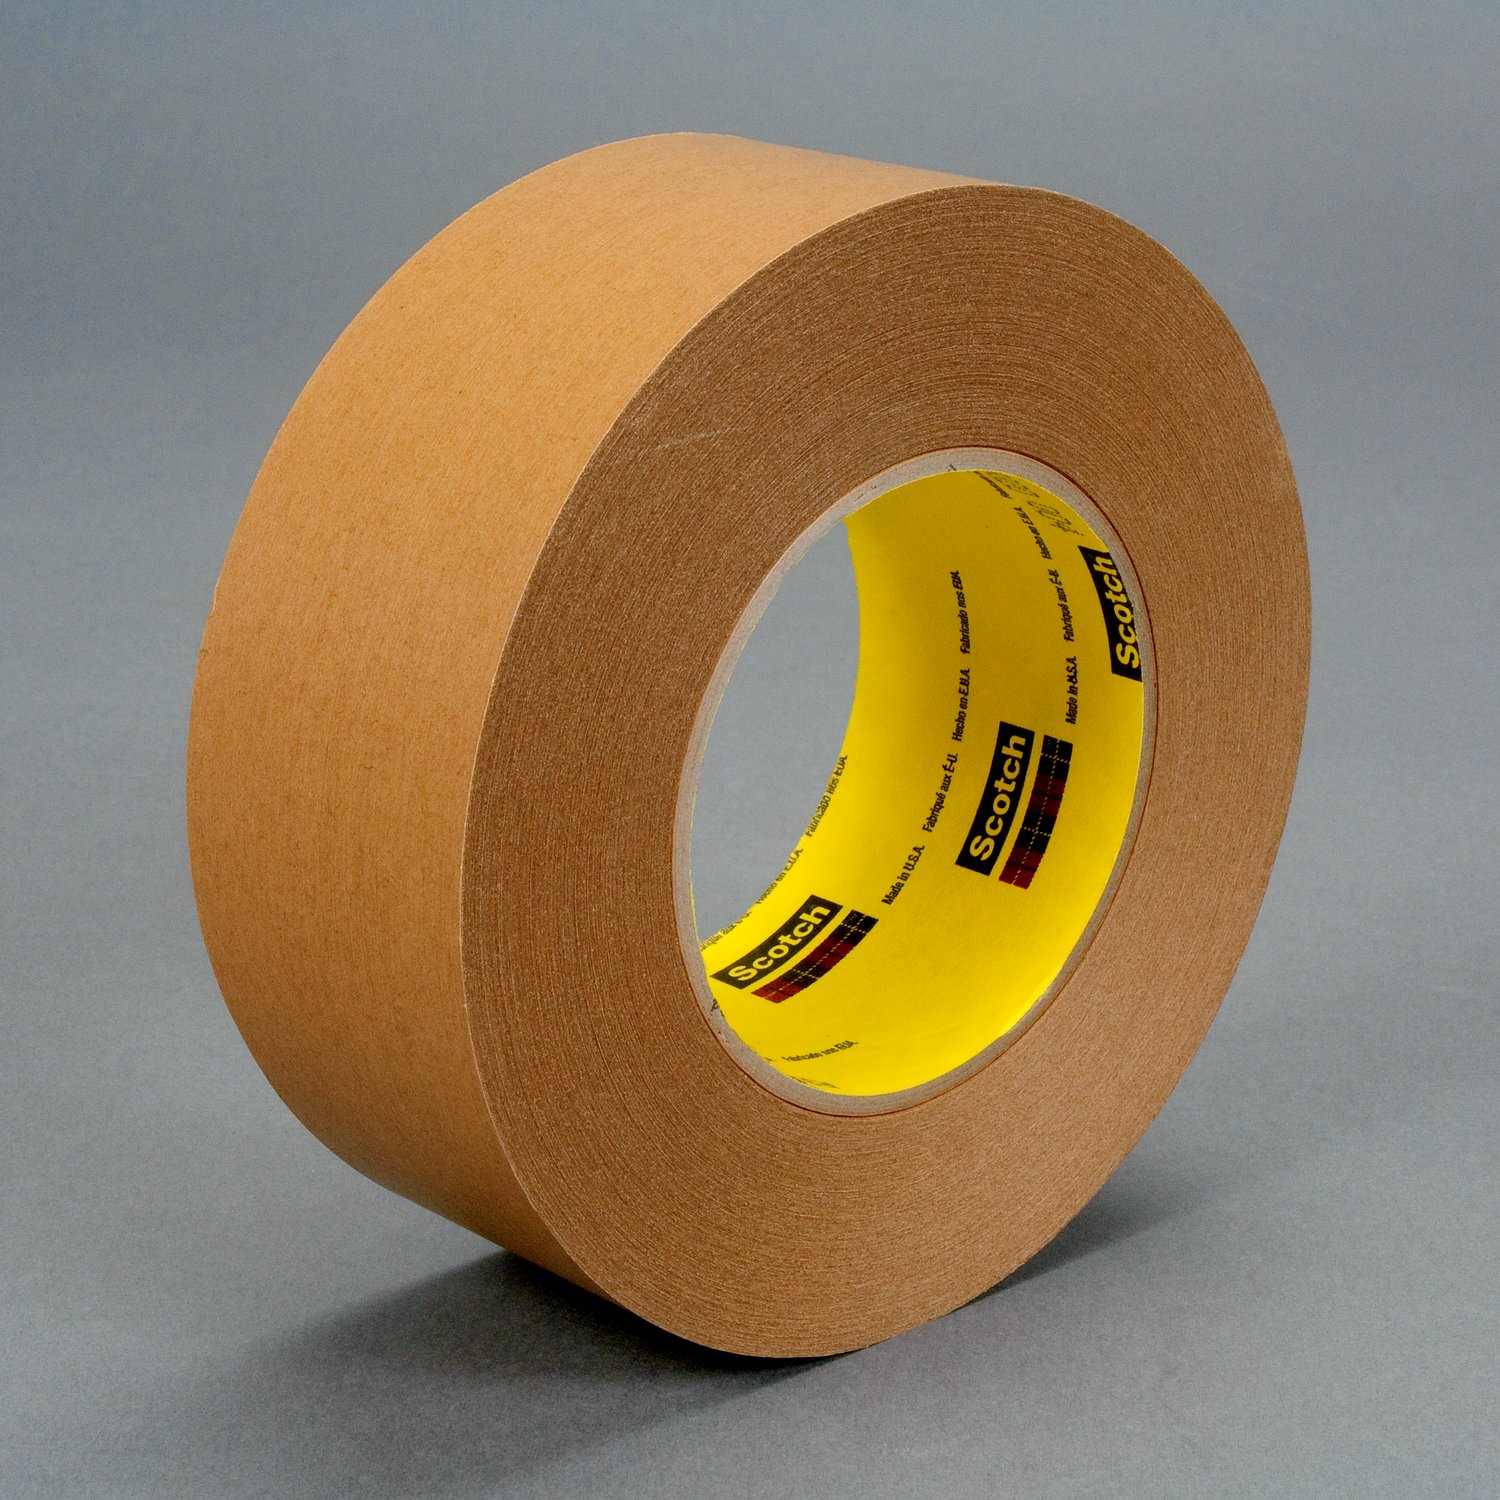 7100132934 - 3M Repulpable Strong Single Coated Tape R3187, Kraft, 7.5 mil, Roll,
Config